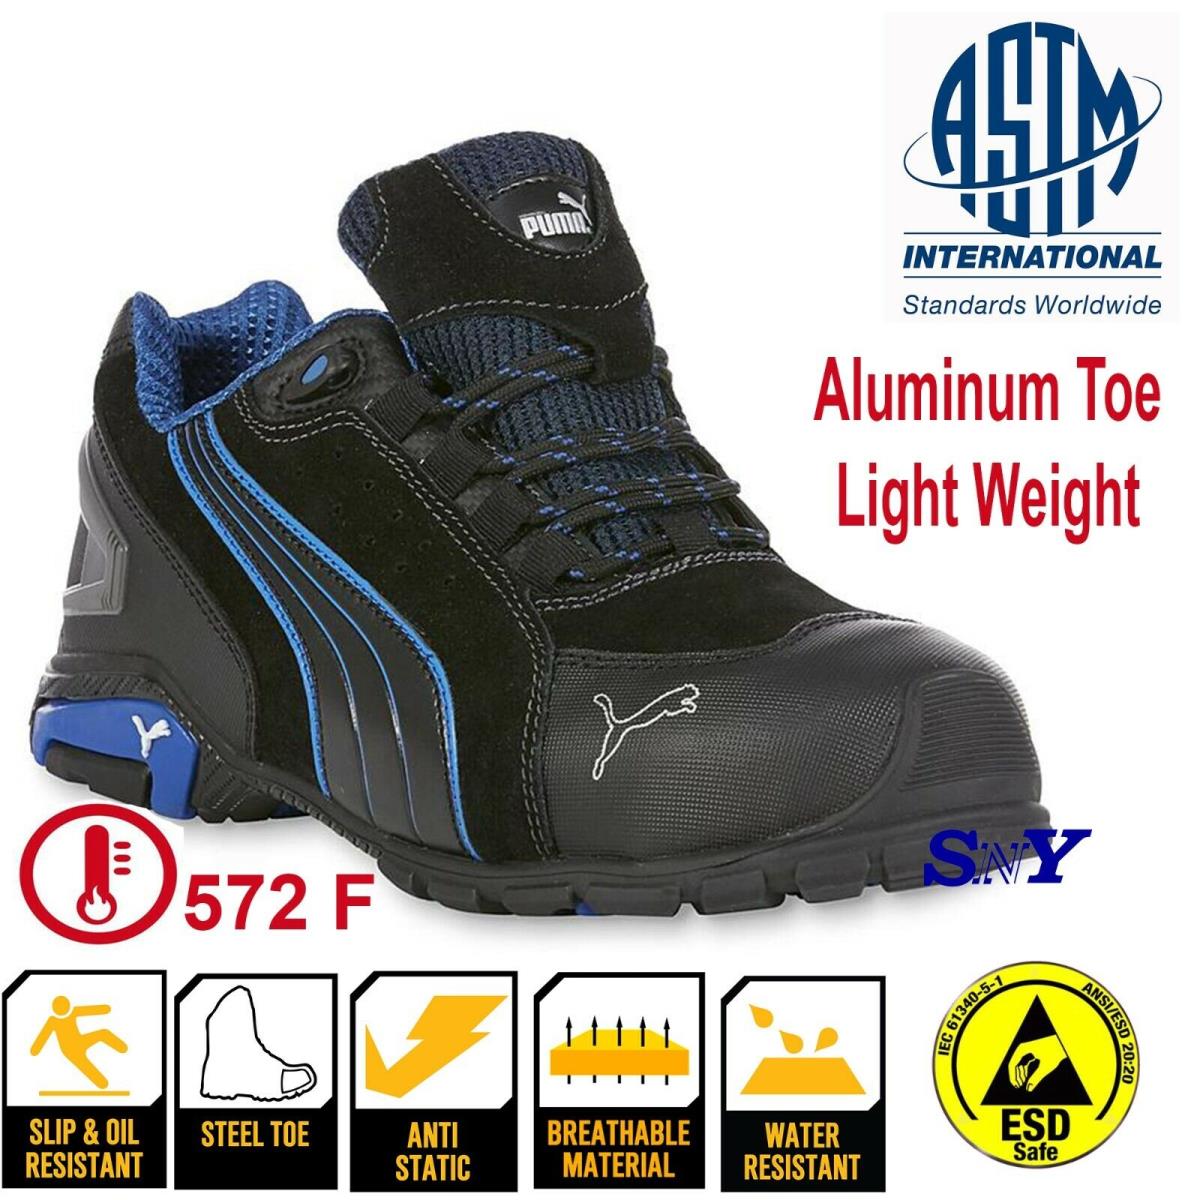 Puma Steel Toe Slip Resistant Work Athletic Safety Thermo Resistant Men`s Shoes